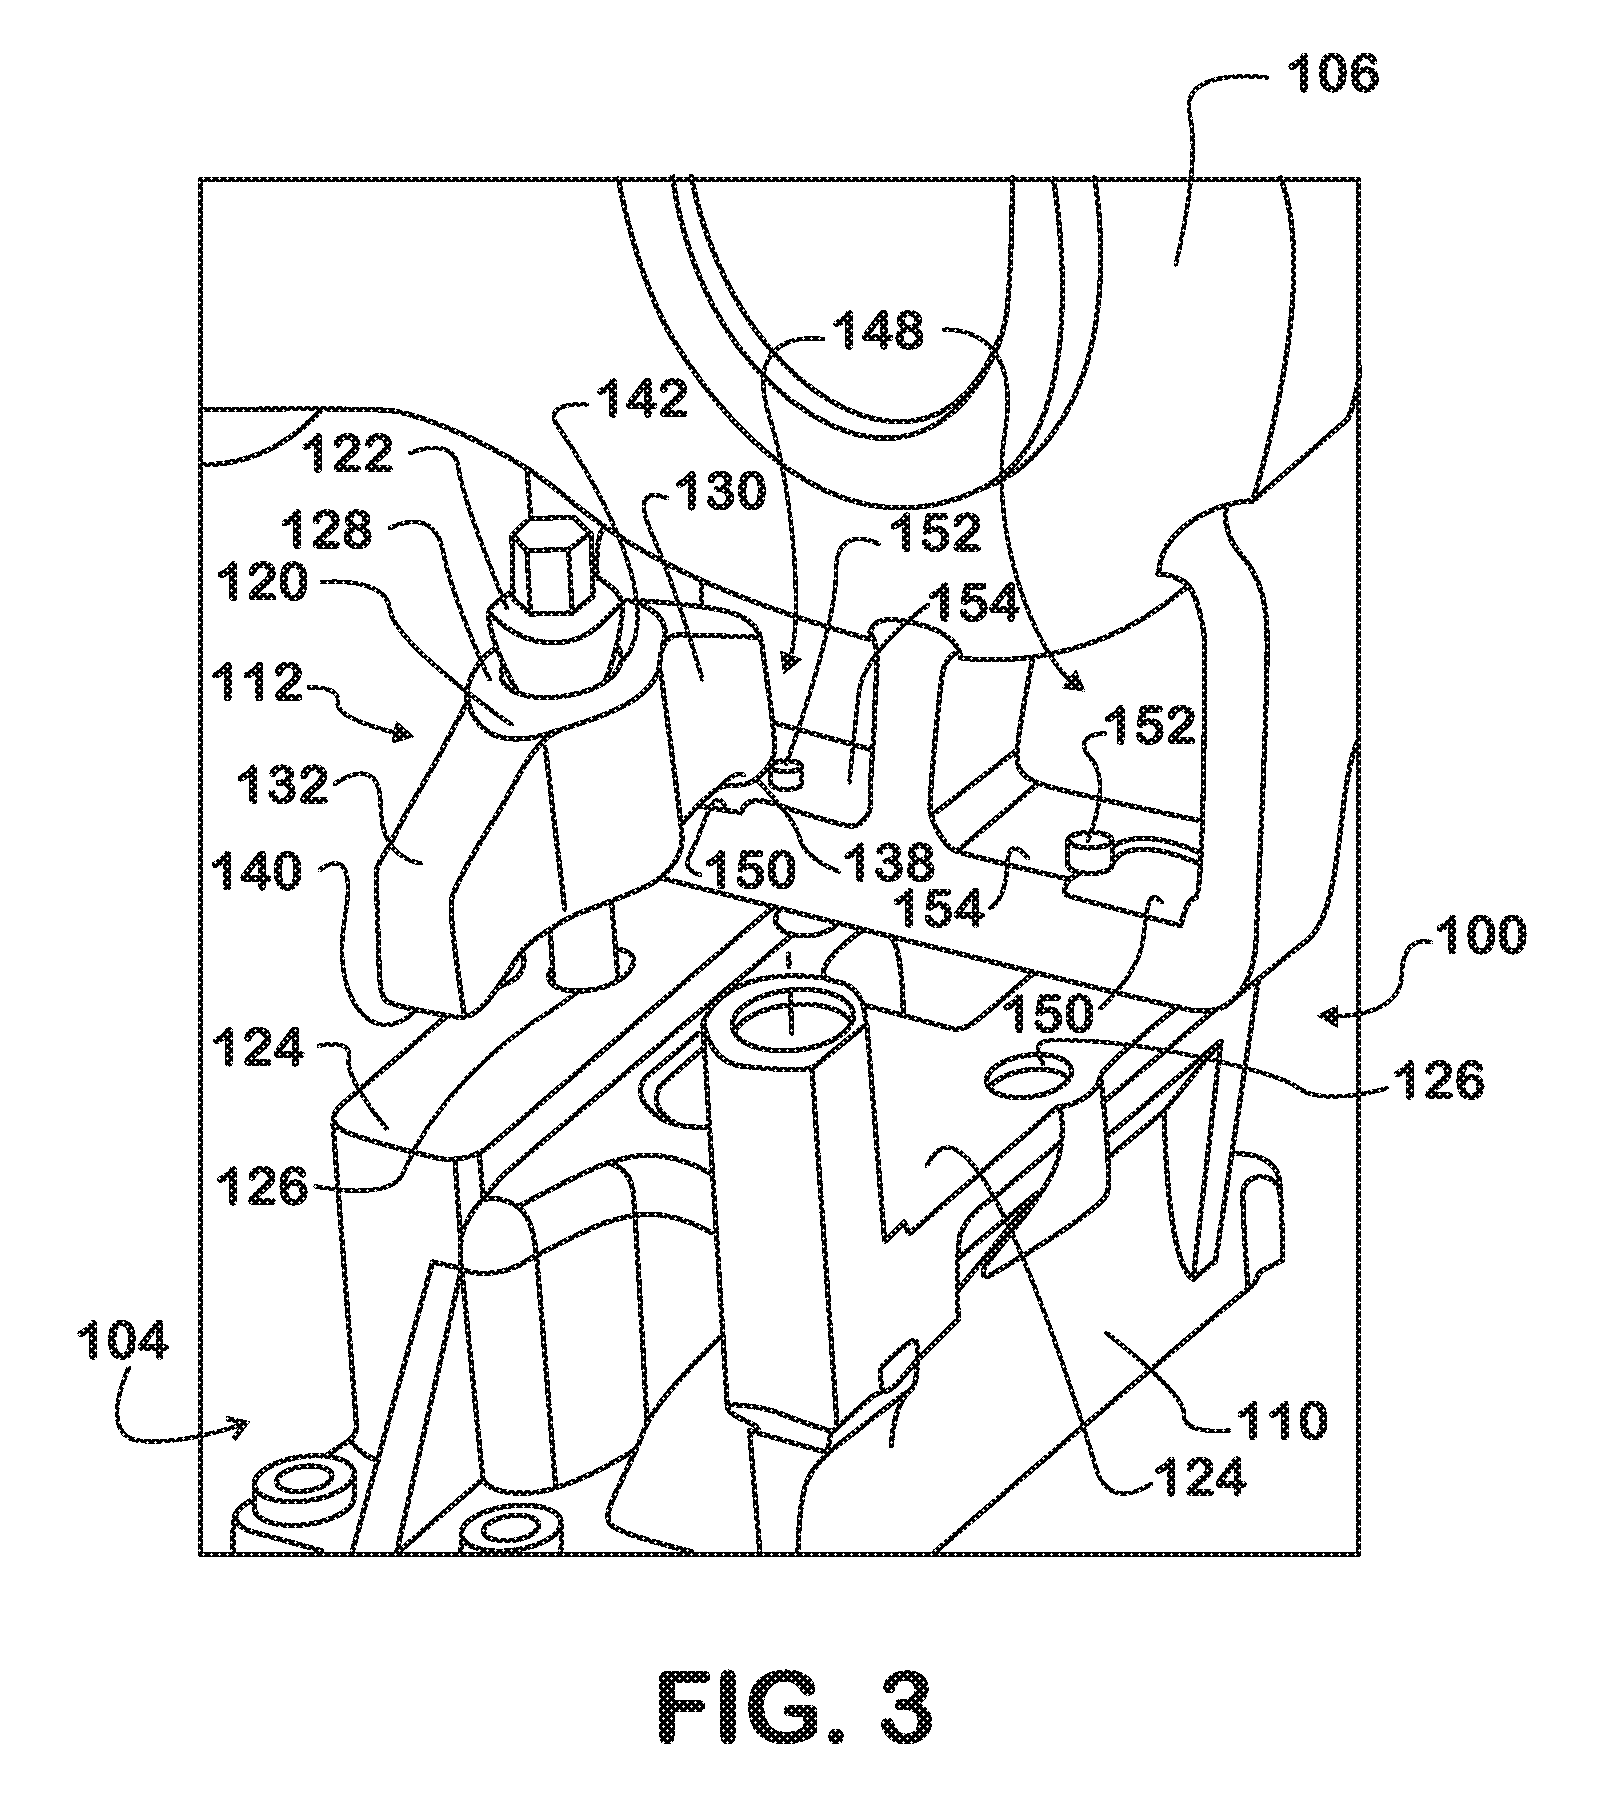 Turbocharger mounting system